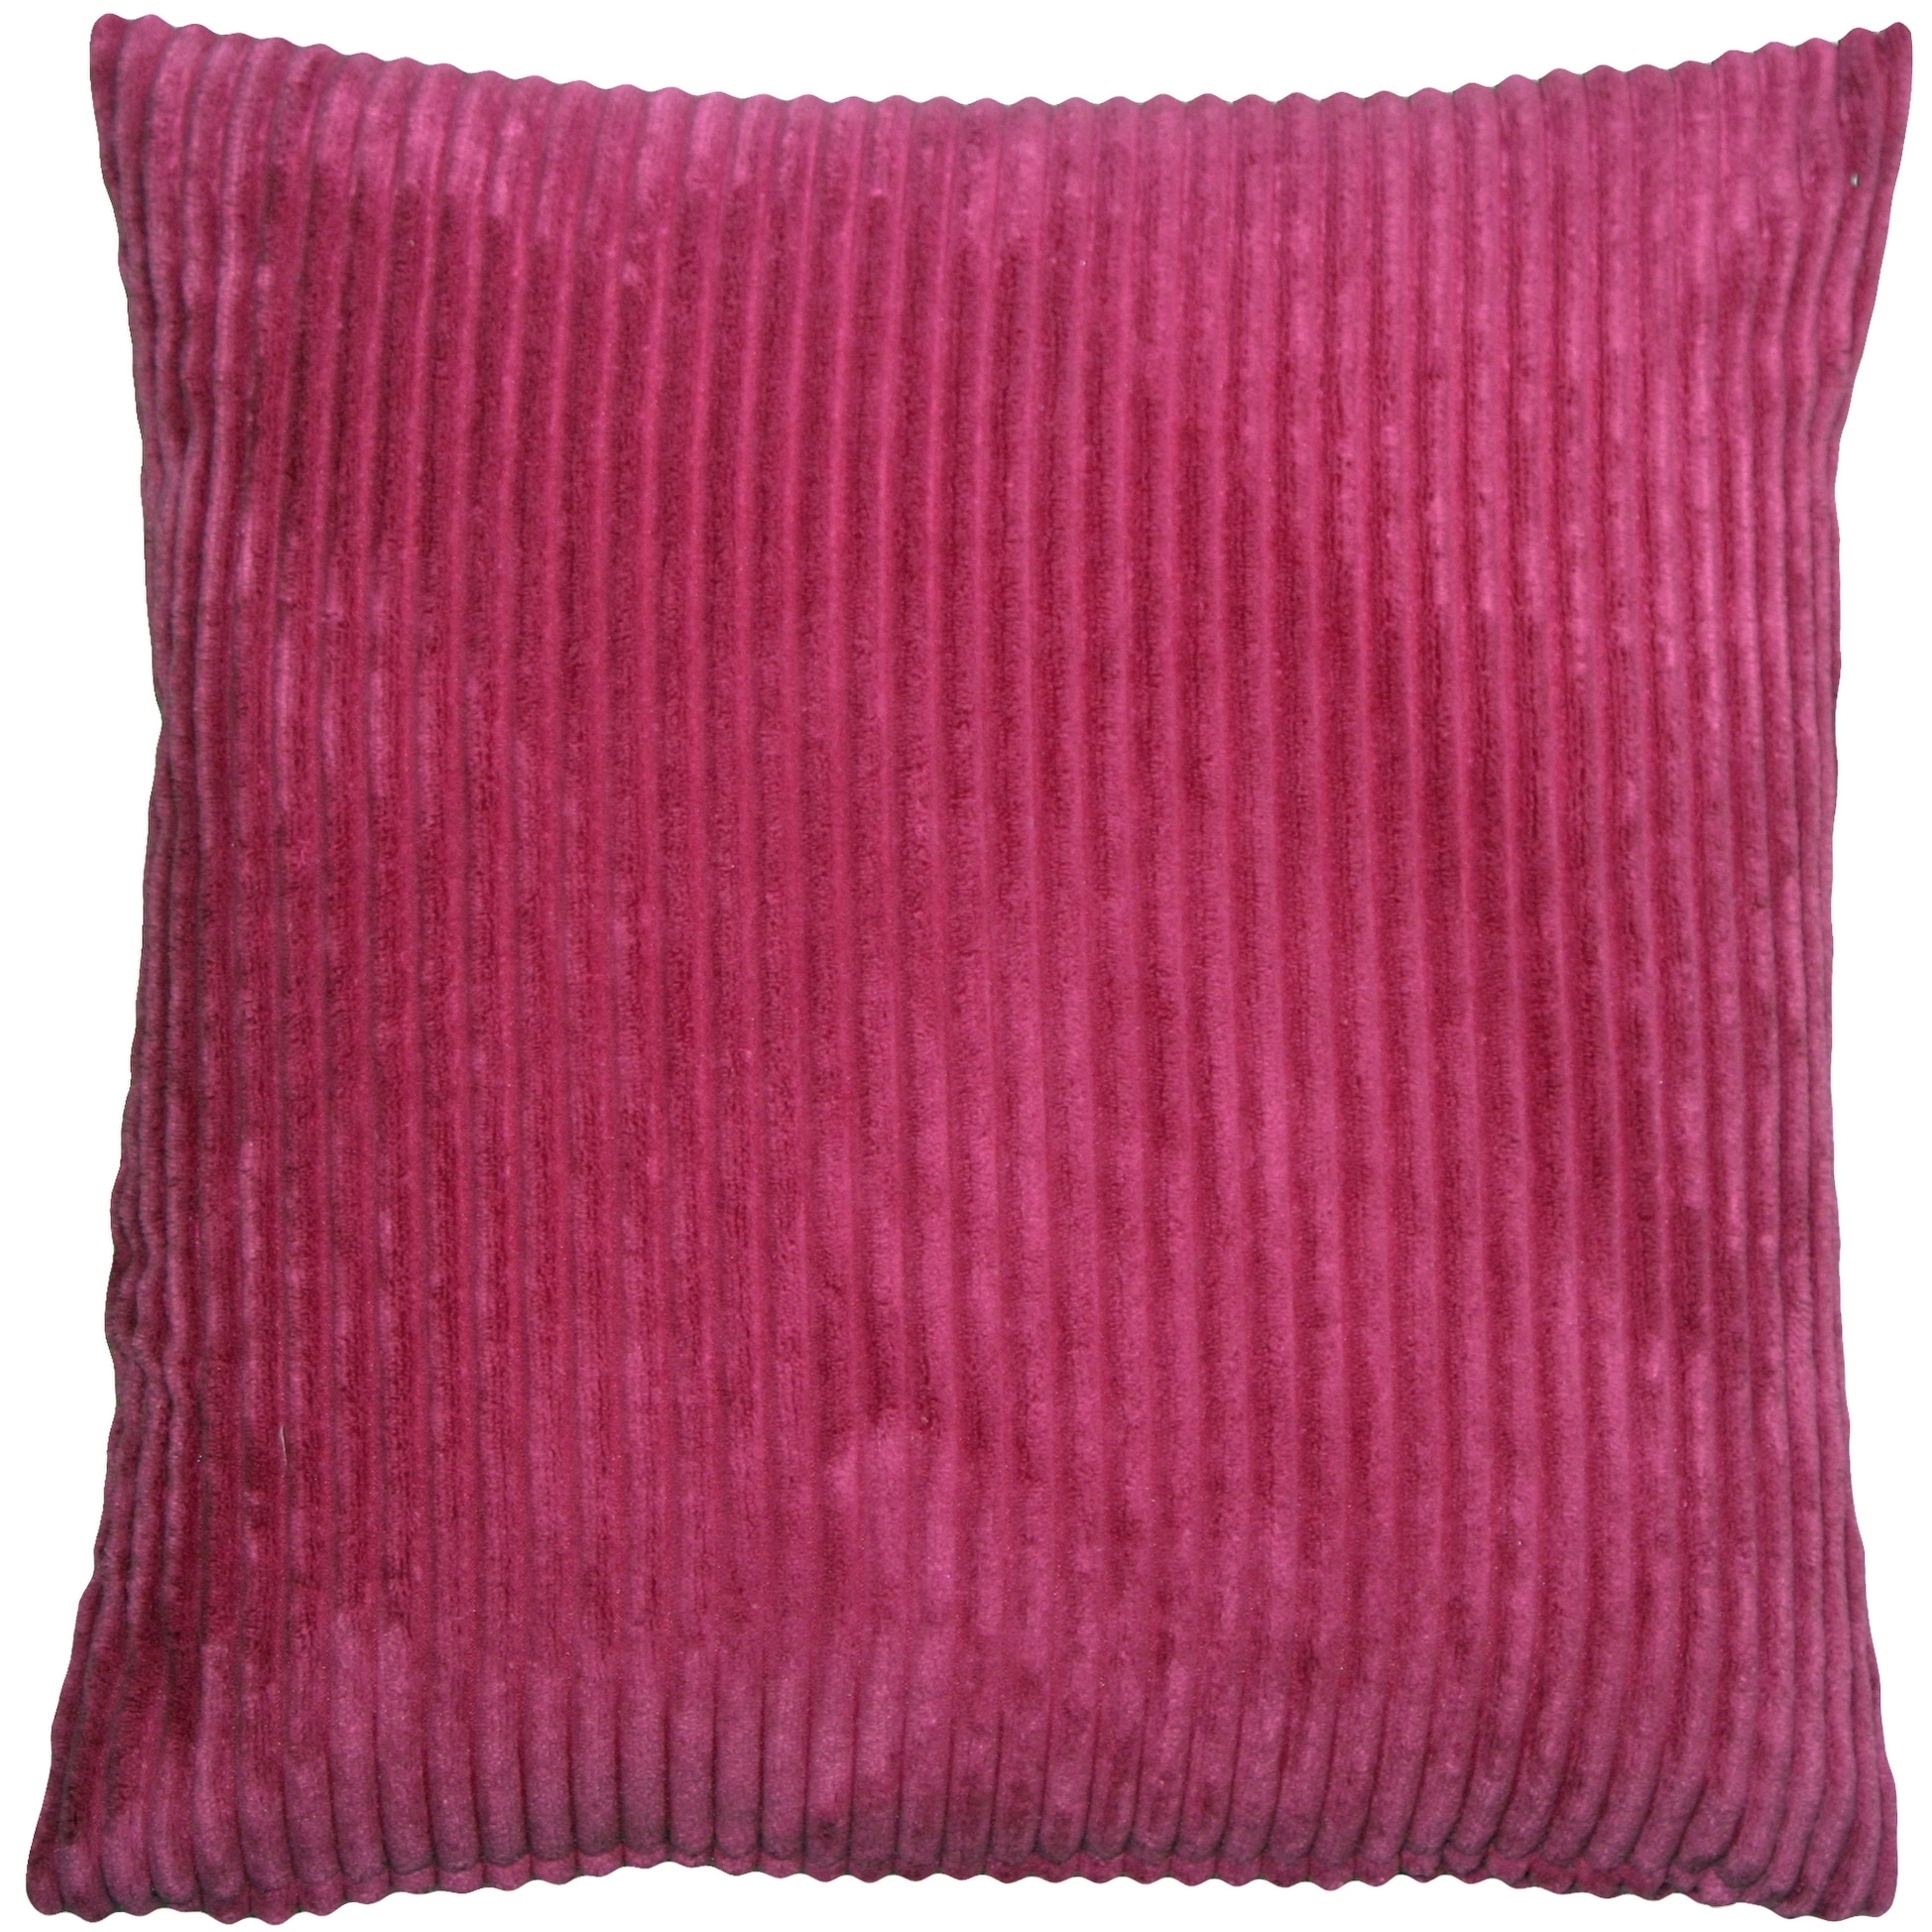 Corduroy Throw Pillow Covers 18x18, Set of 4 Multi-Color Matching